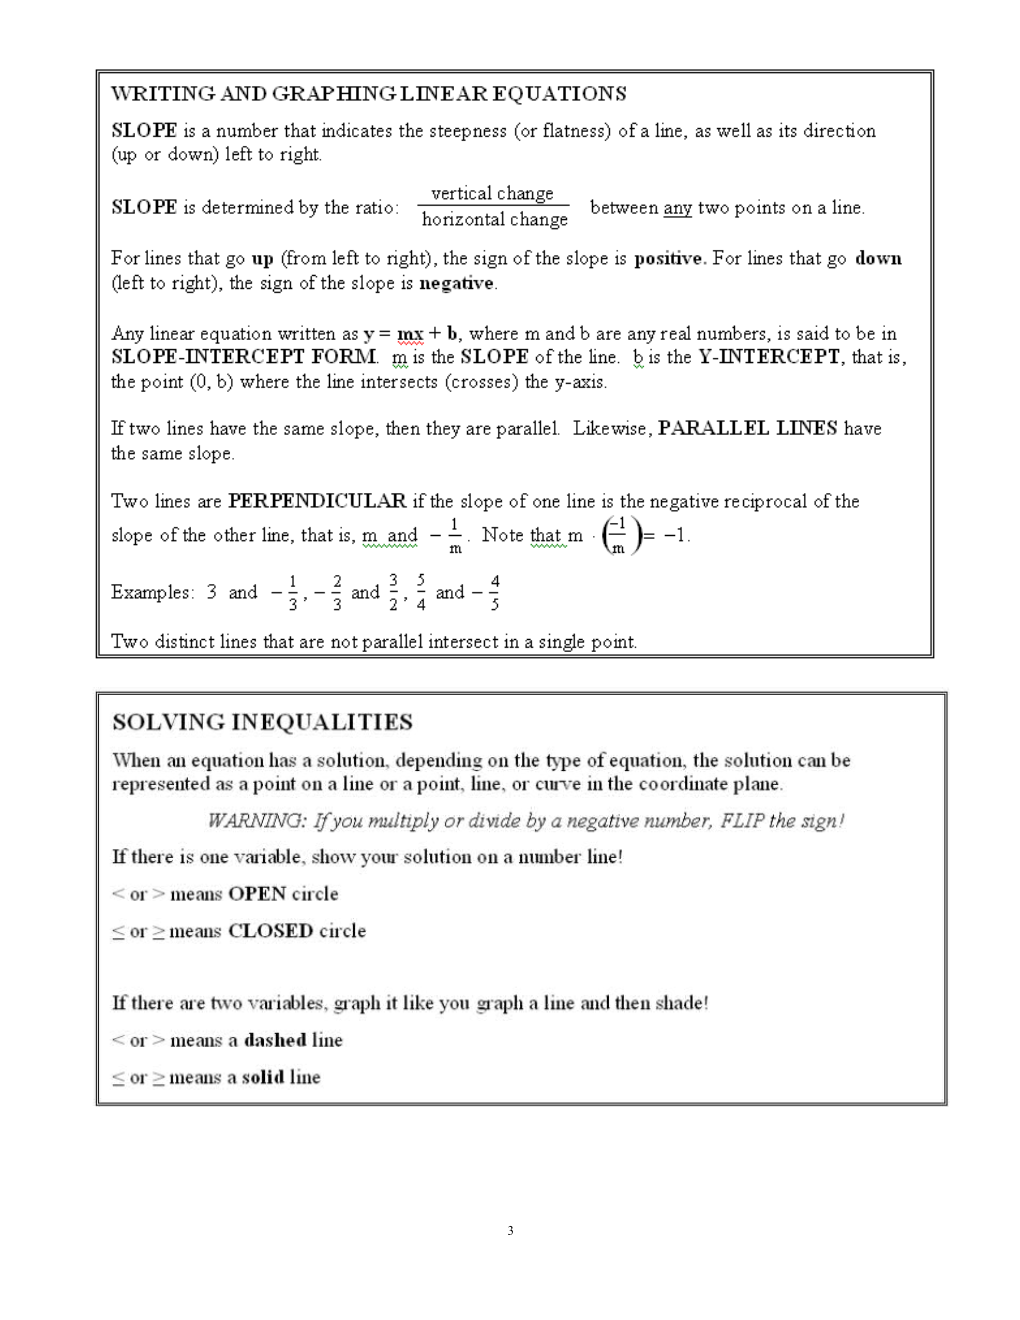 Algebra IB Final Exam Study Guide and Practice Problems